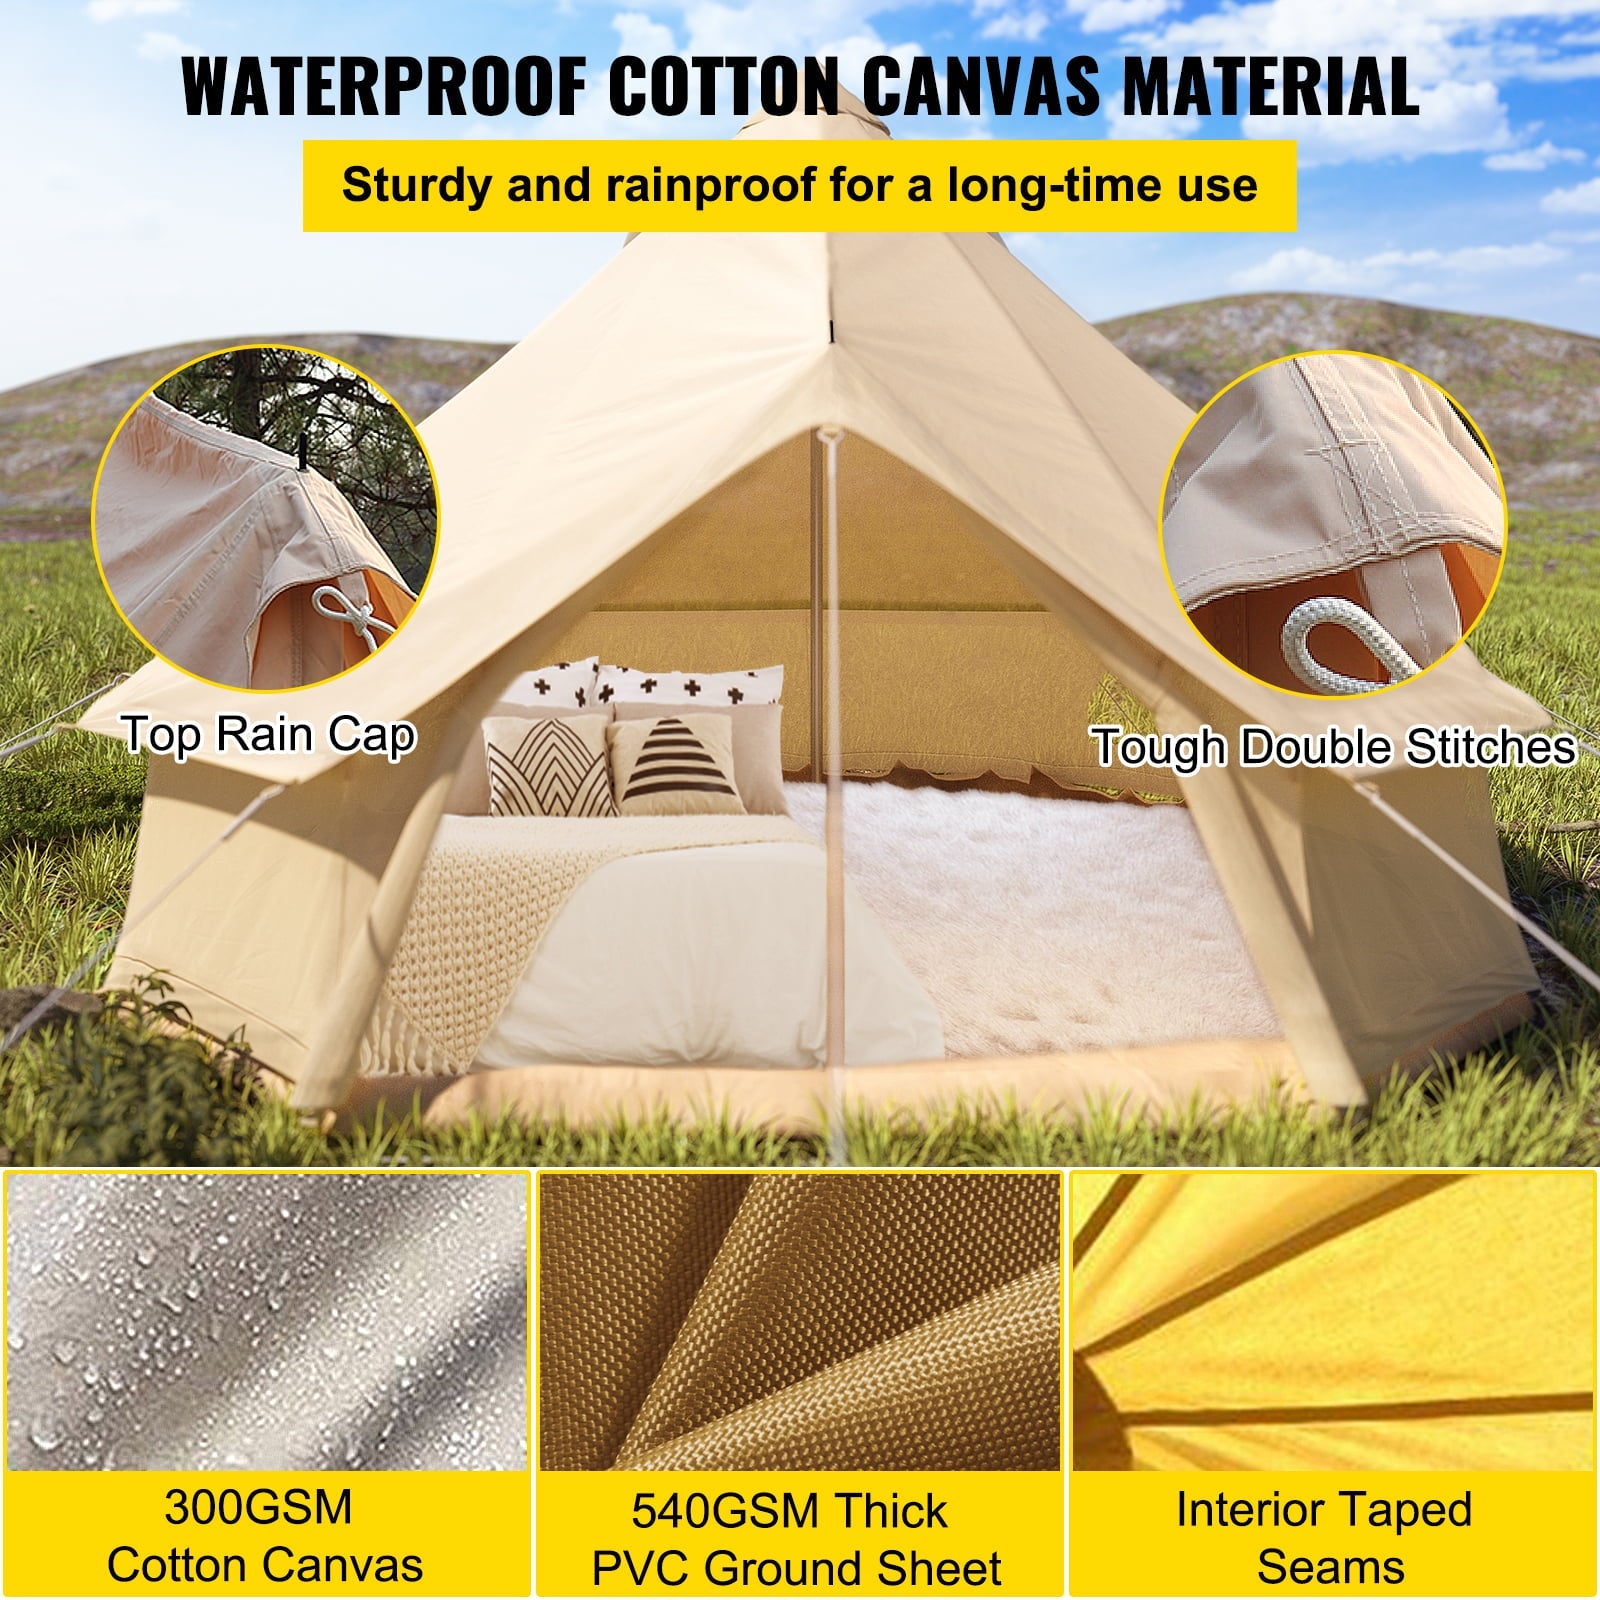 VEVORbrand Canvas Bell Tent 13.12ft /4m Cotton Canvas Tent with Wall Stove Jacket Glamping Tent Waterproof Bell Tent for Family Camping Outdoor Hunting in 4 Seasons